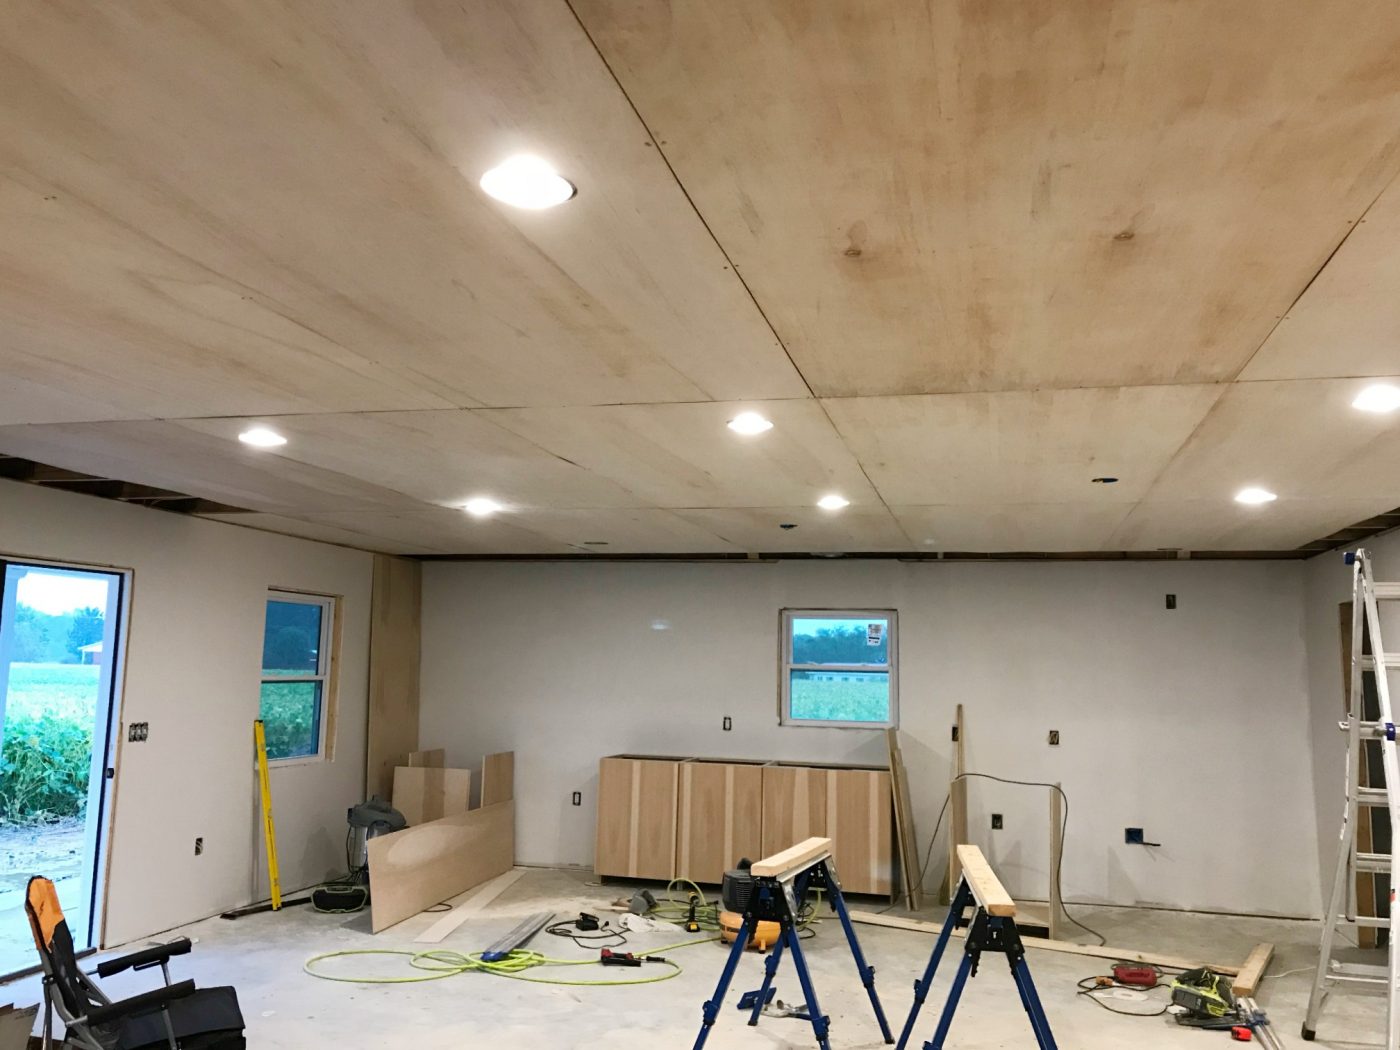 Plywood ceiling layout direction